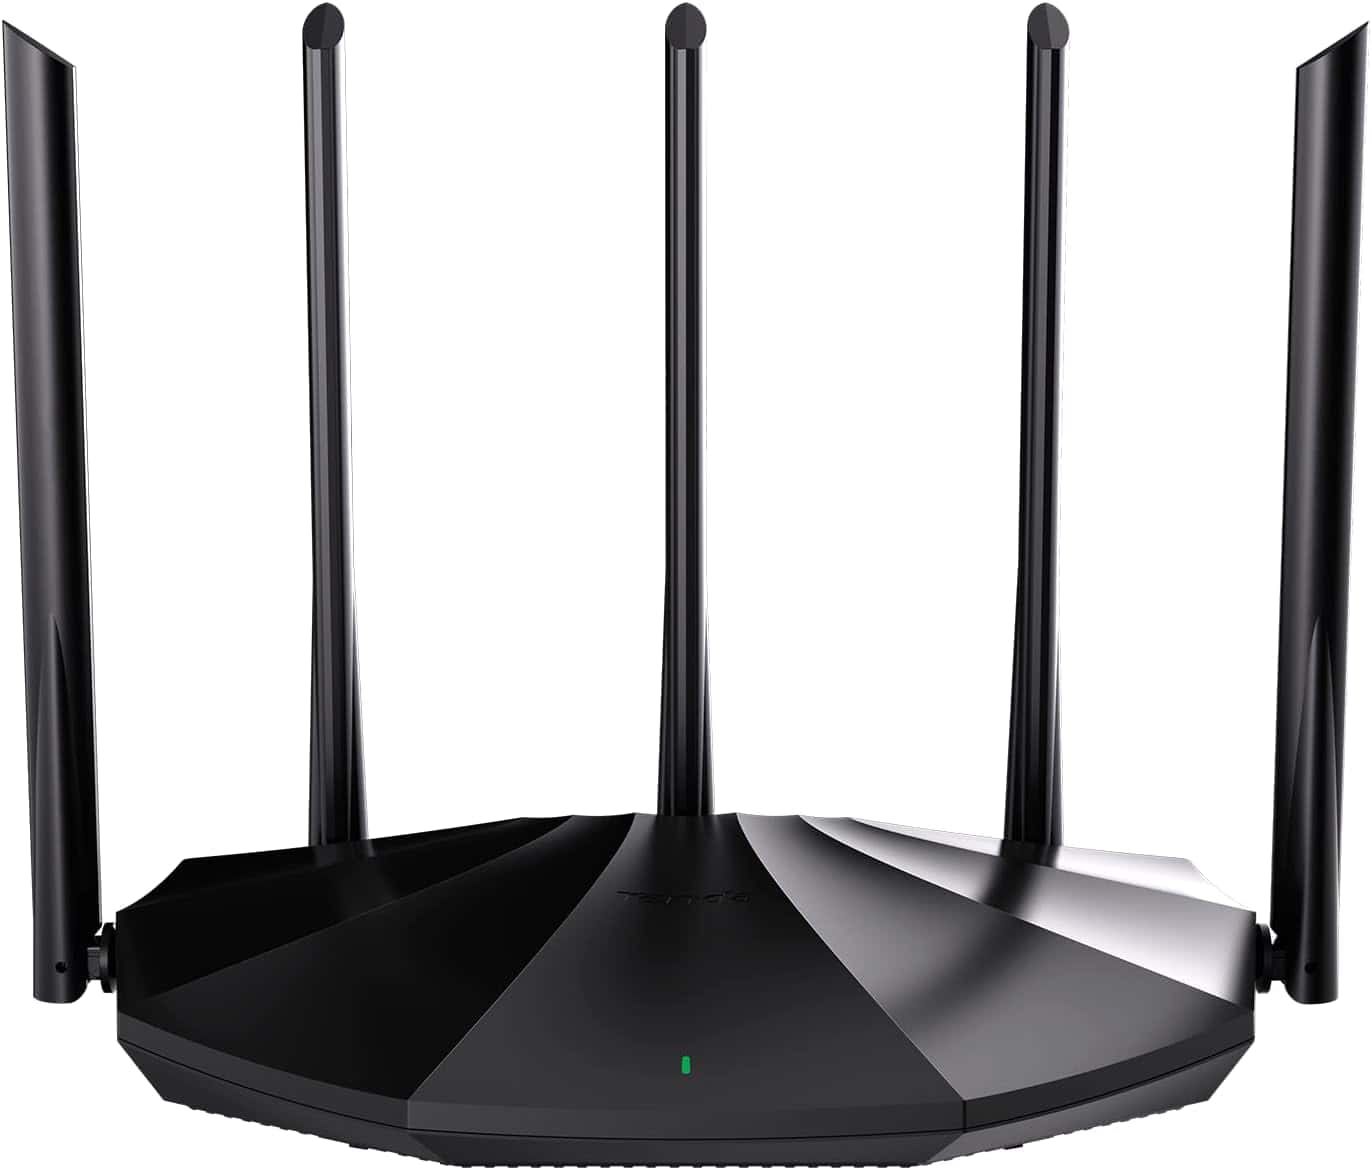 A black Tenda AX1500 router with four antennas on a white background, likely indicating a device used for high-speed Wi-Fi connectivity.